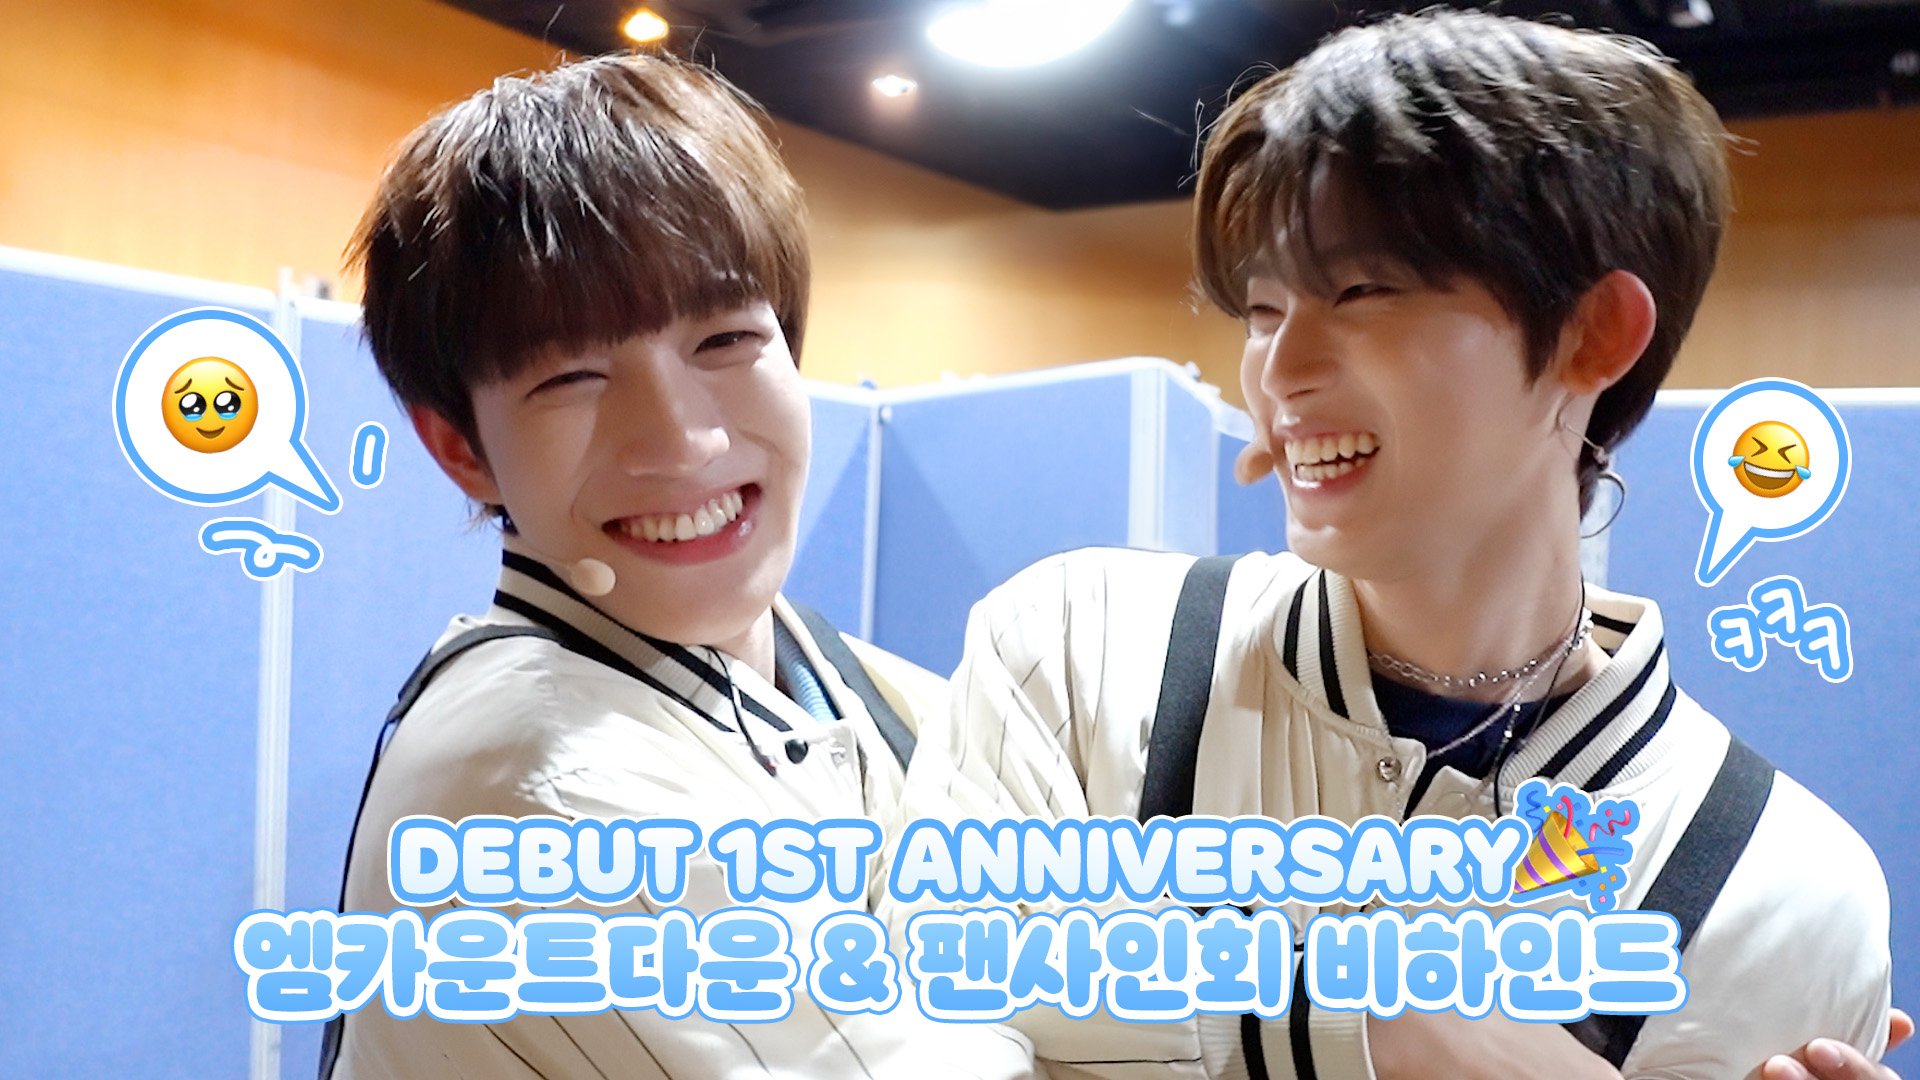 The Wind Debut 1st Anniversary M COUNTDOWN & Fansign Event Behind